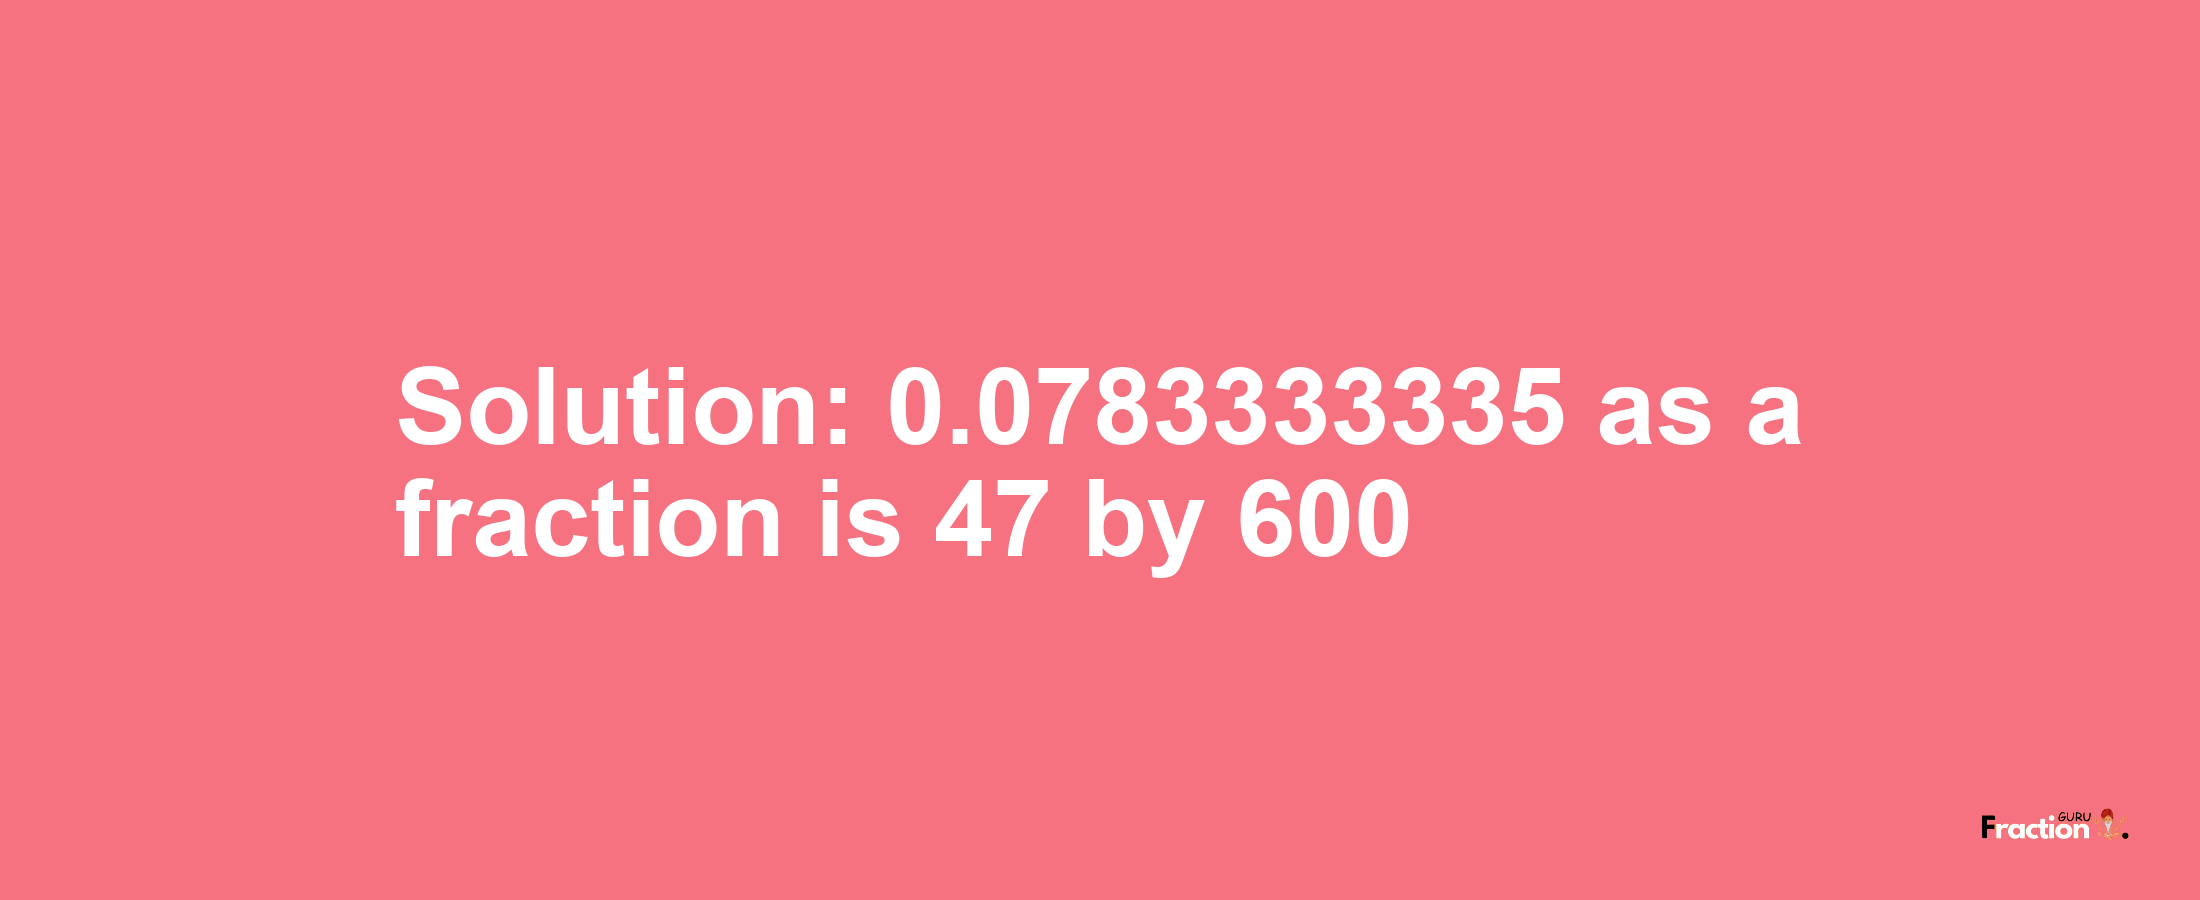 Solution:0.0783333335 as a fraction is 47/600